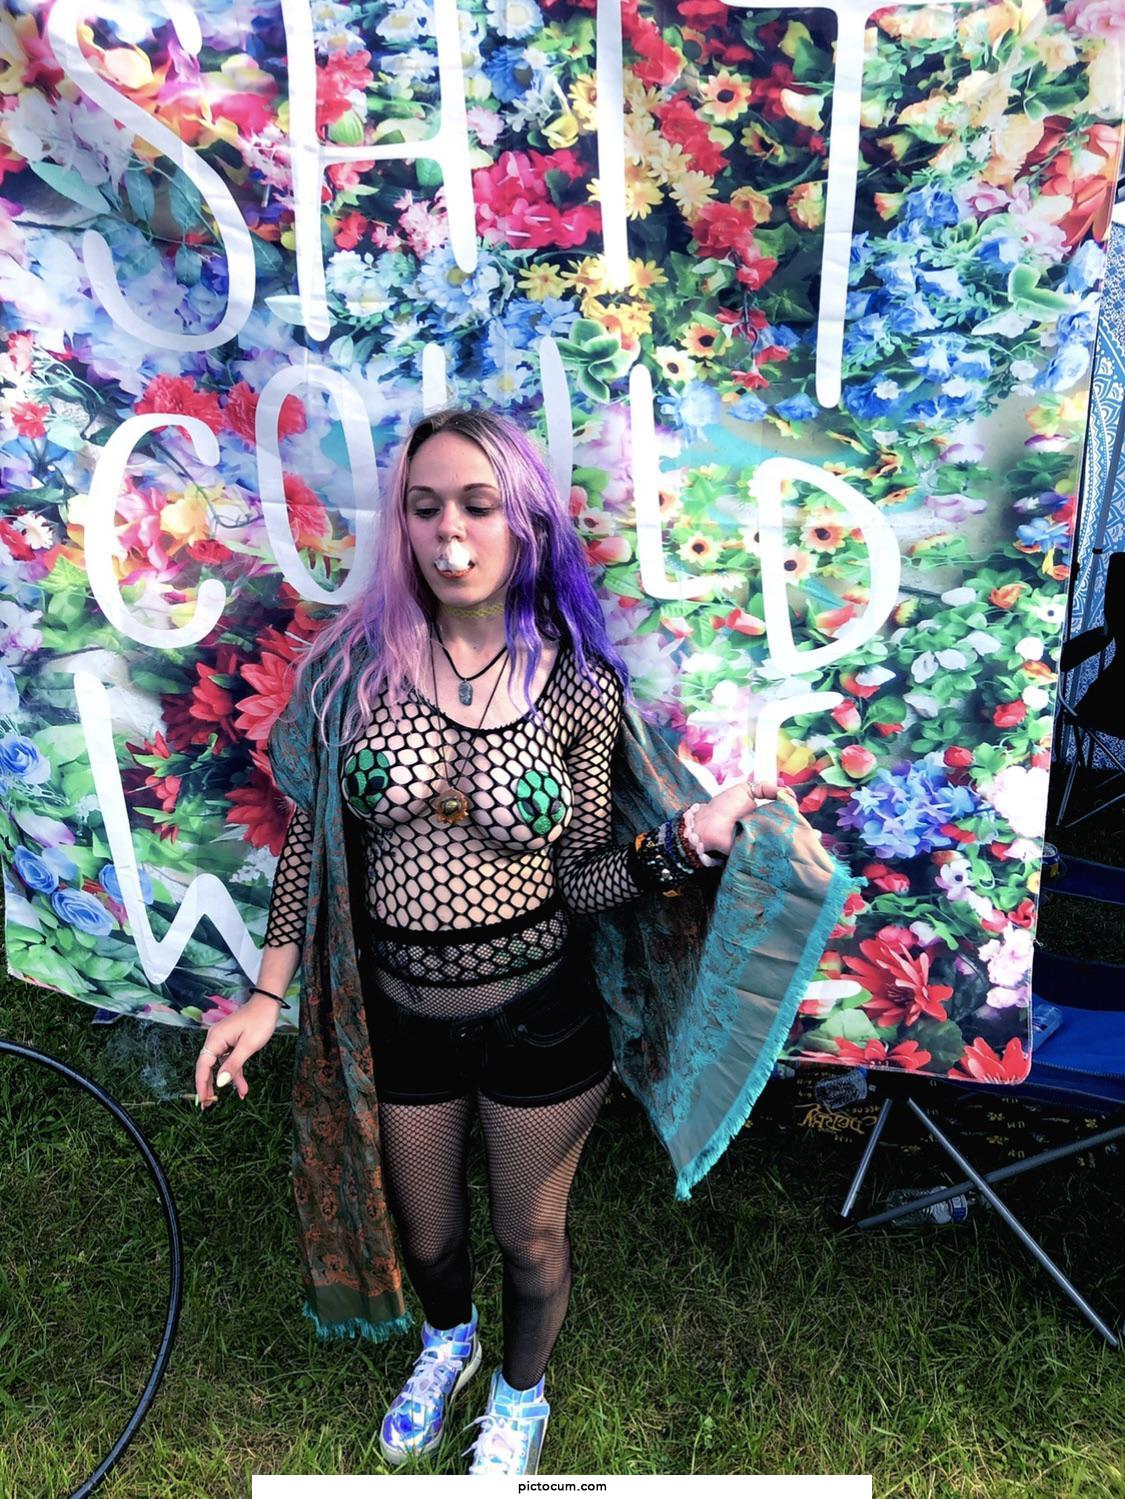 do you think this year at electric forest i should go without the pasties?